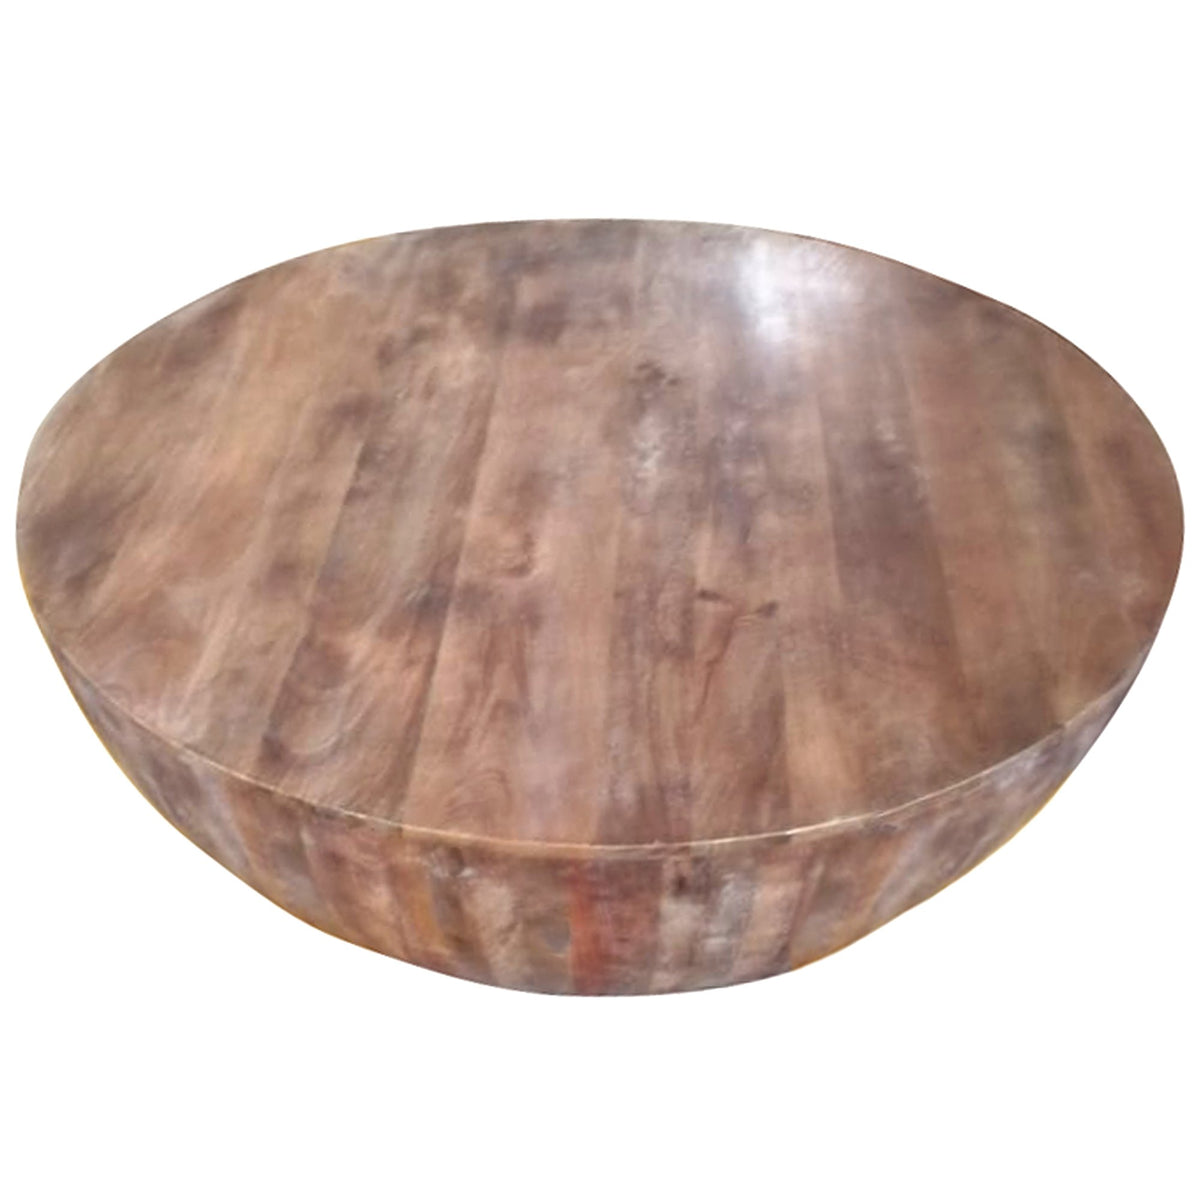 Arthur Hand carved Drum Shape Round Top Mango Wood Distressed Wooden Coffee Table, Brown- UPT-32184